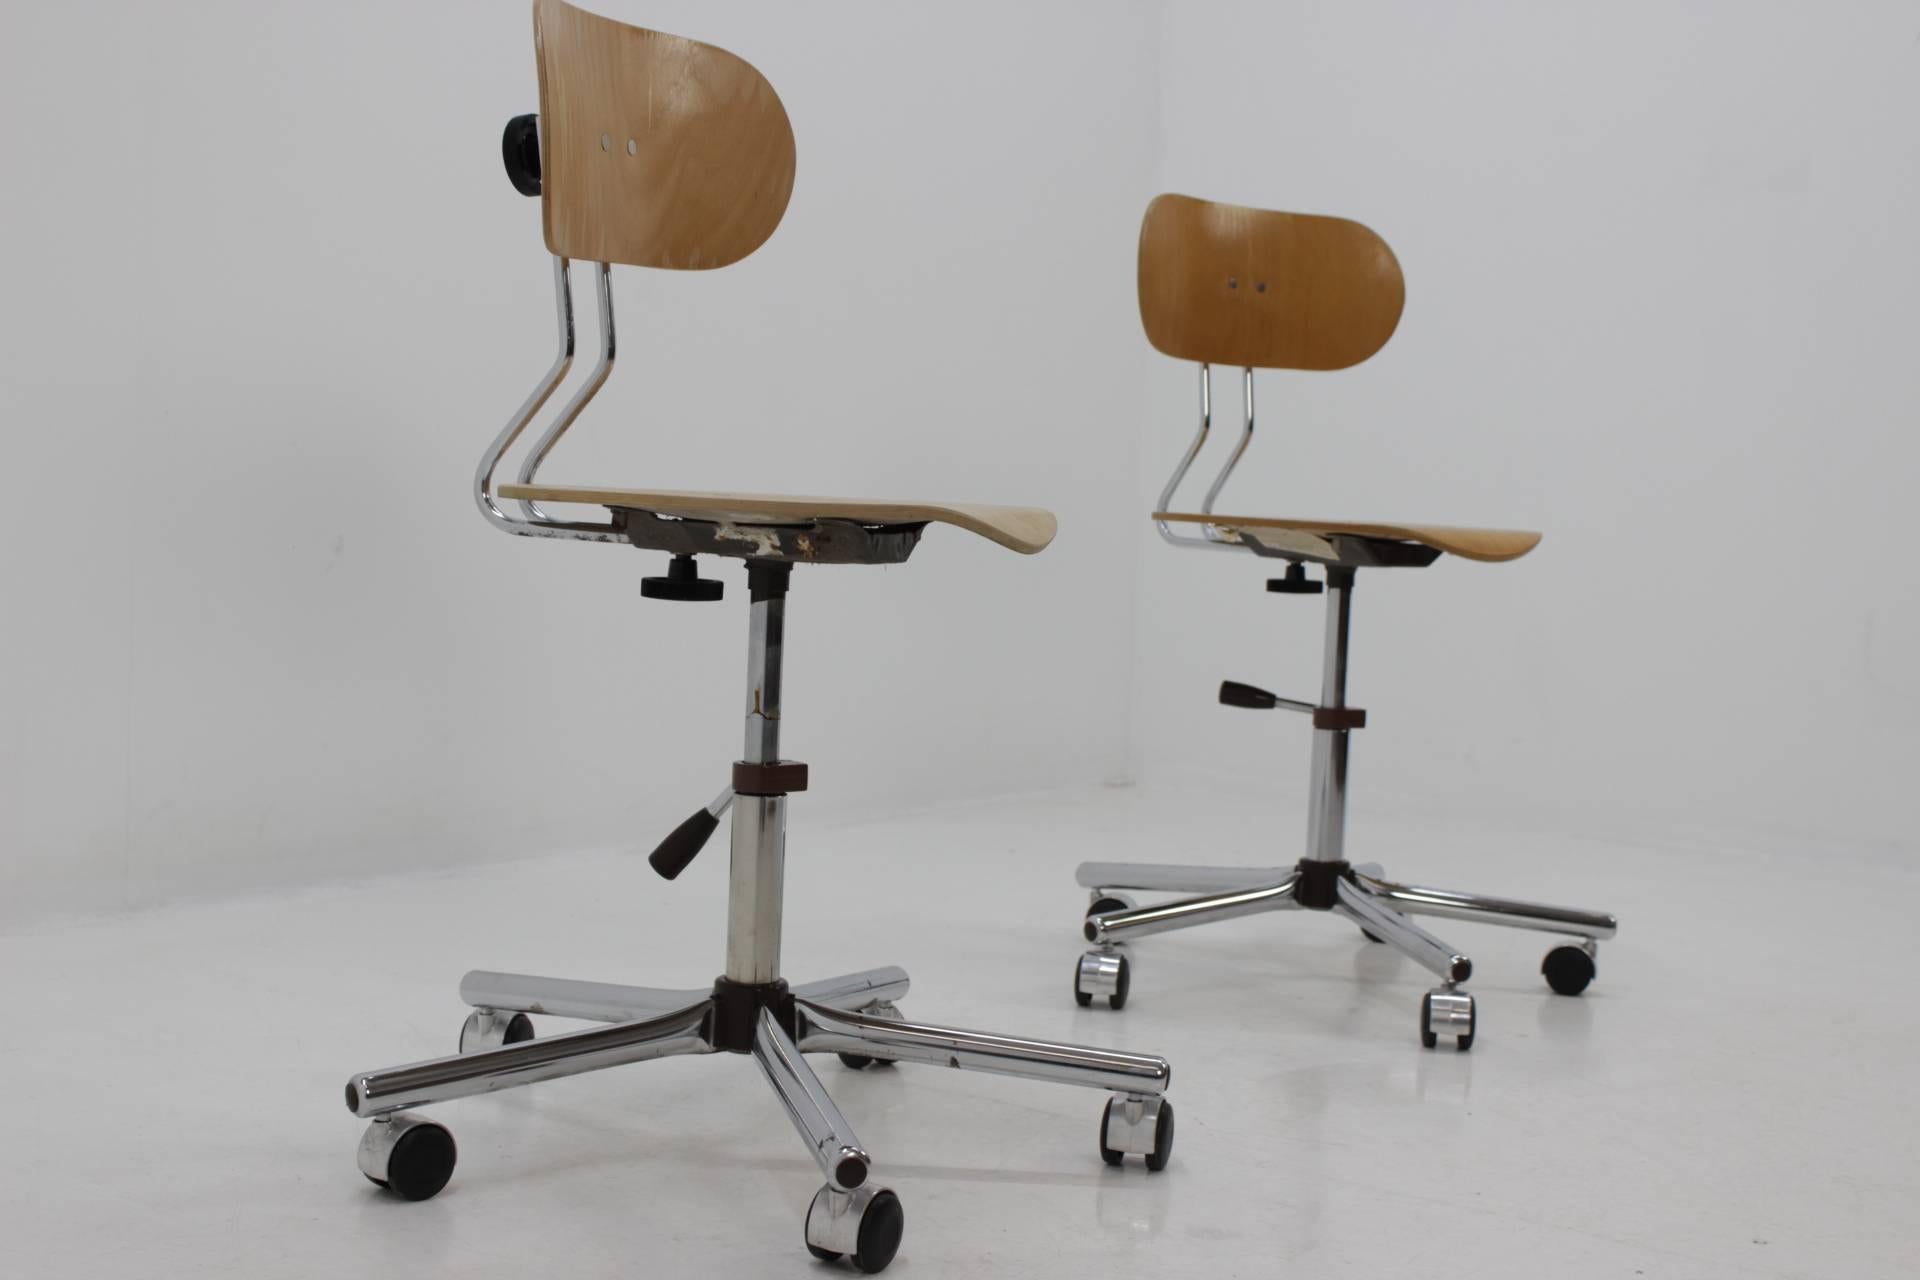 - 1970s, Czechoslovakia
- Never used 
- Minor defects on chrome
- Adjustable (seat height: from 42 to 54).